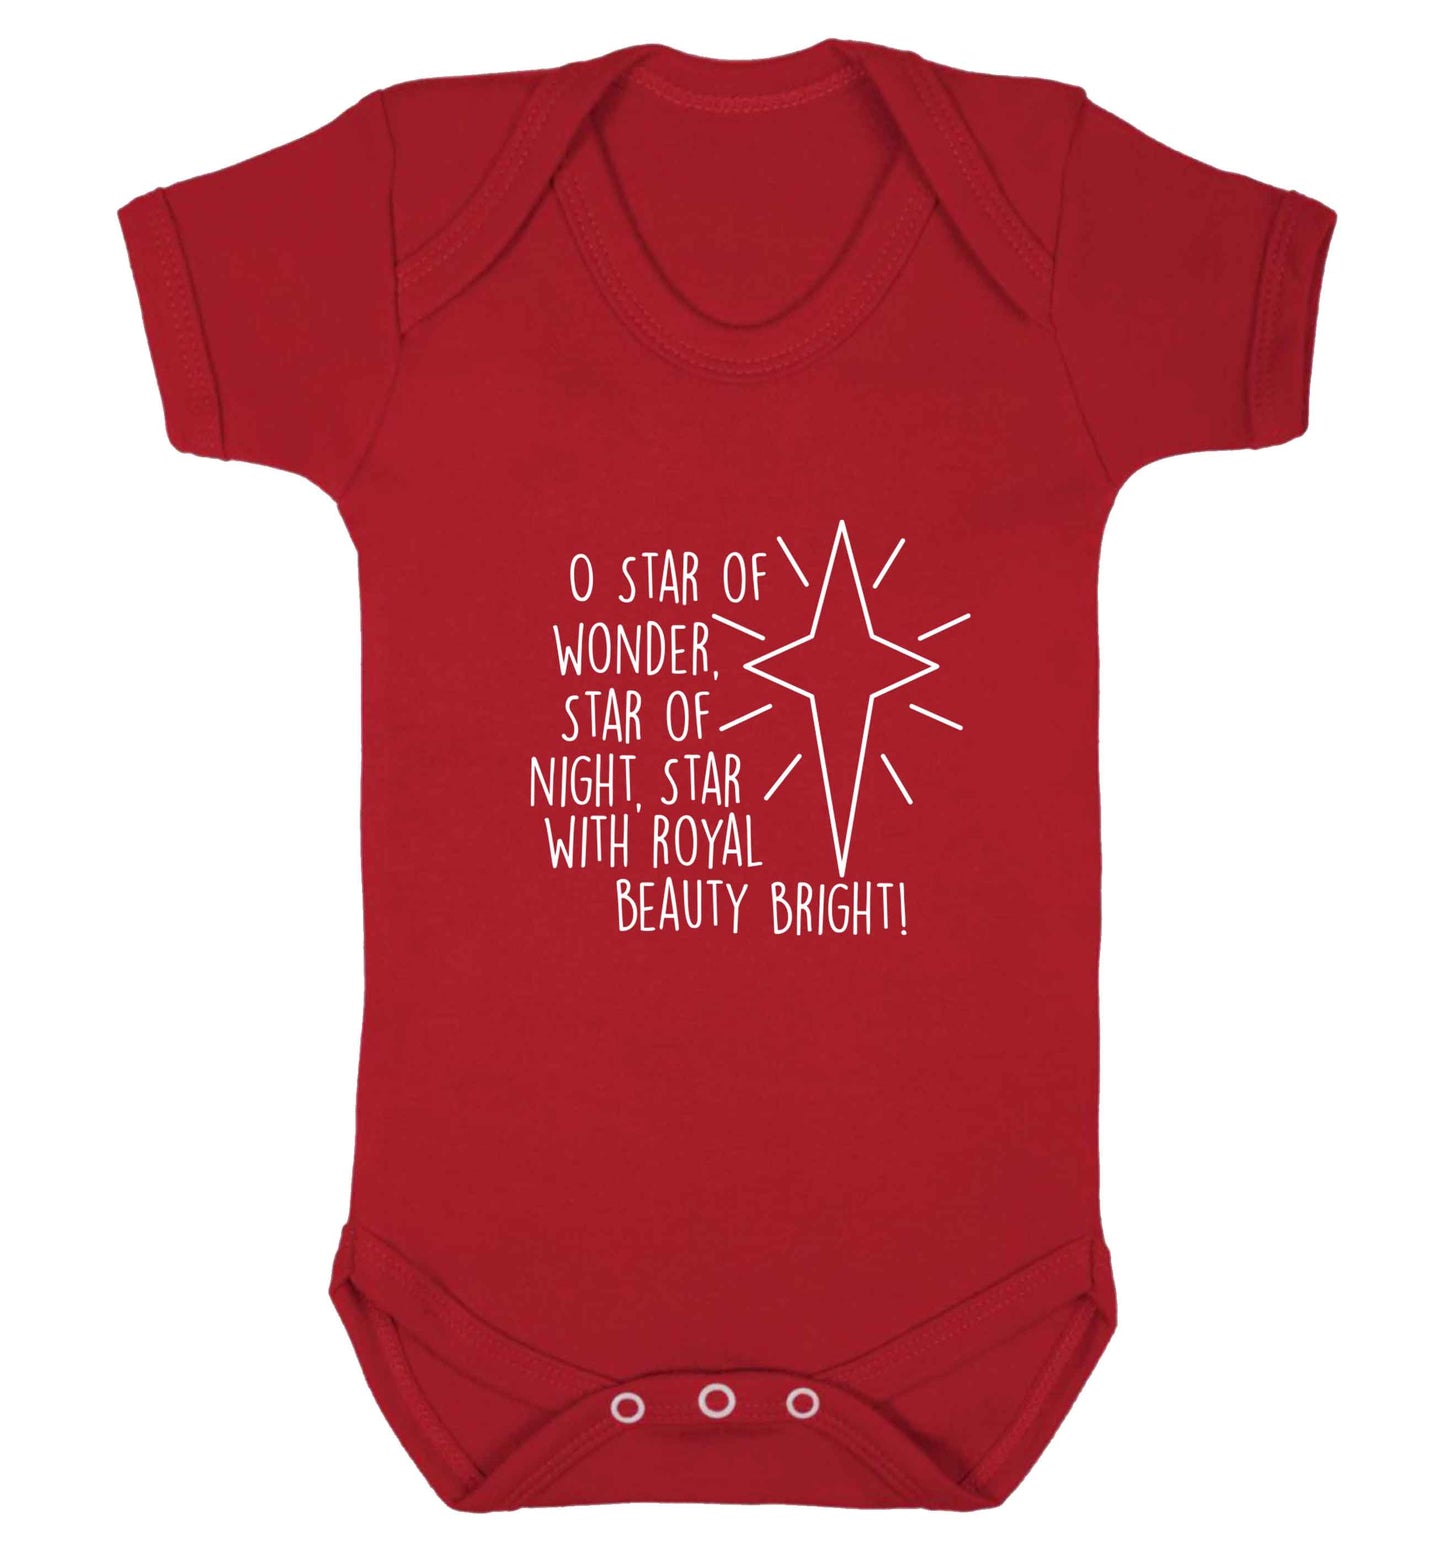 Oh star of wonder star of night, star with royal beauty bright baby vest red 18-24 months